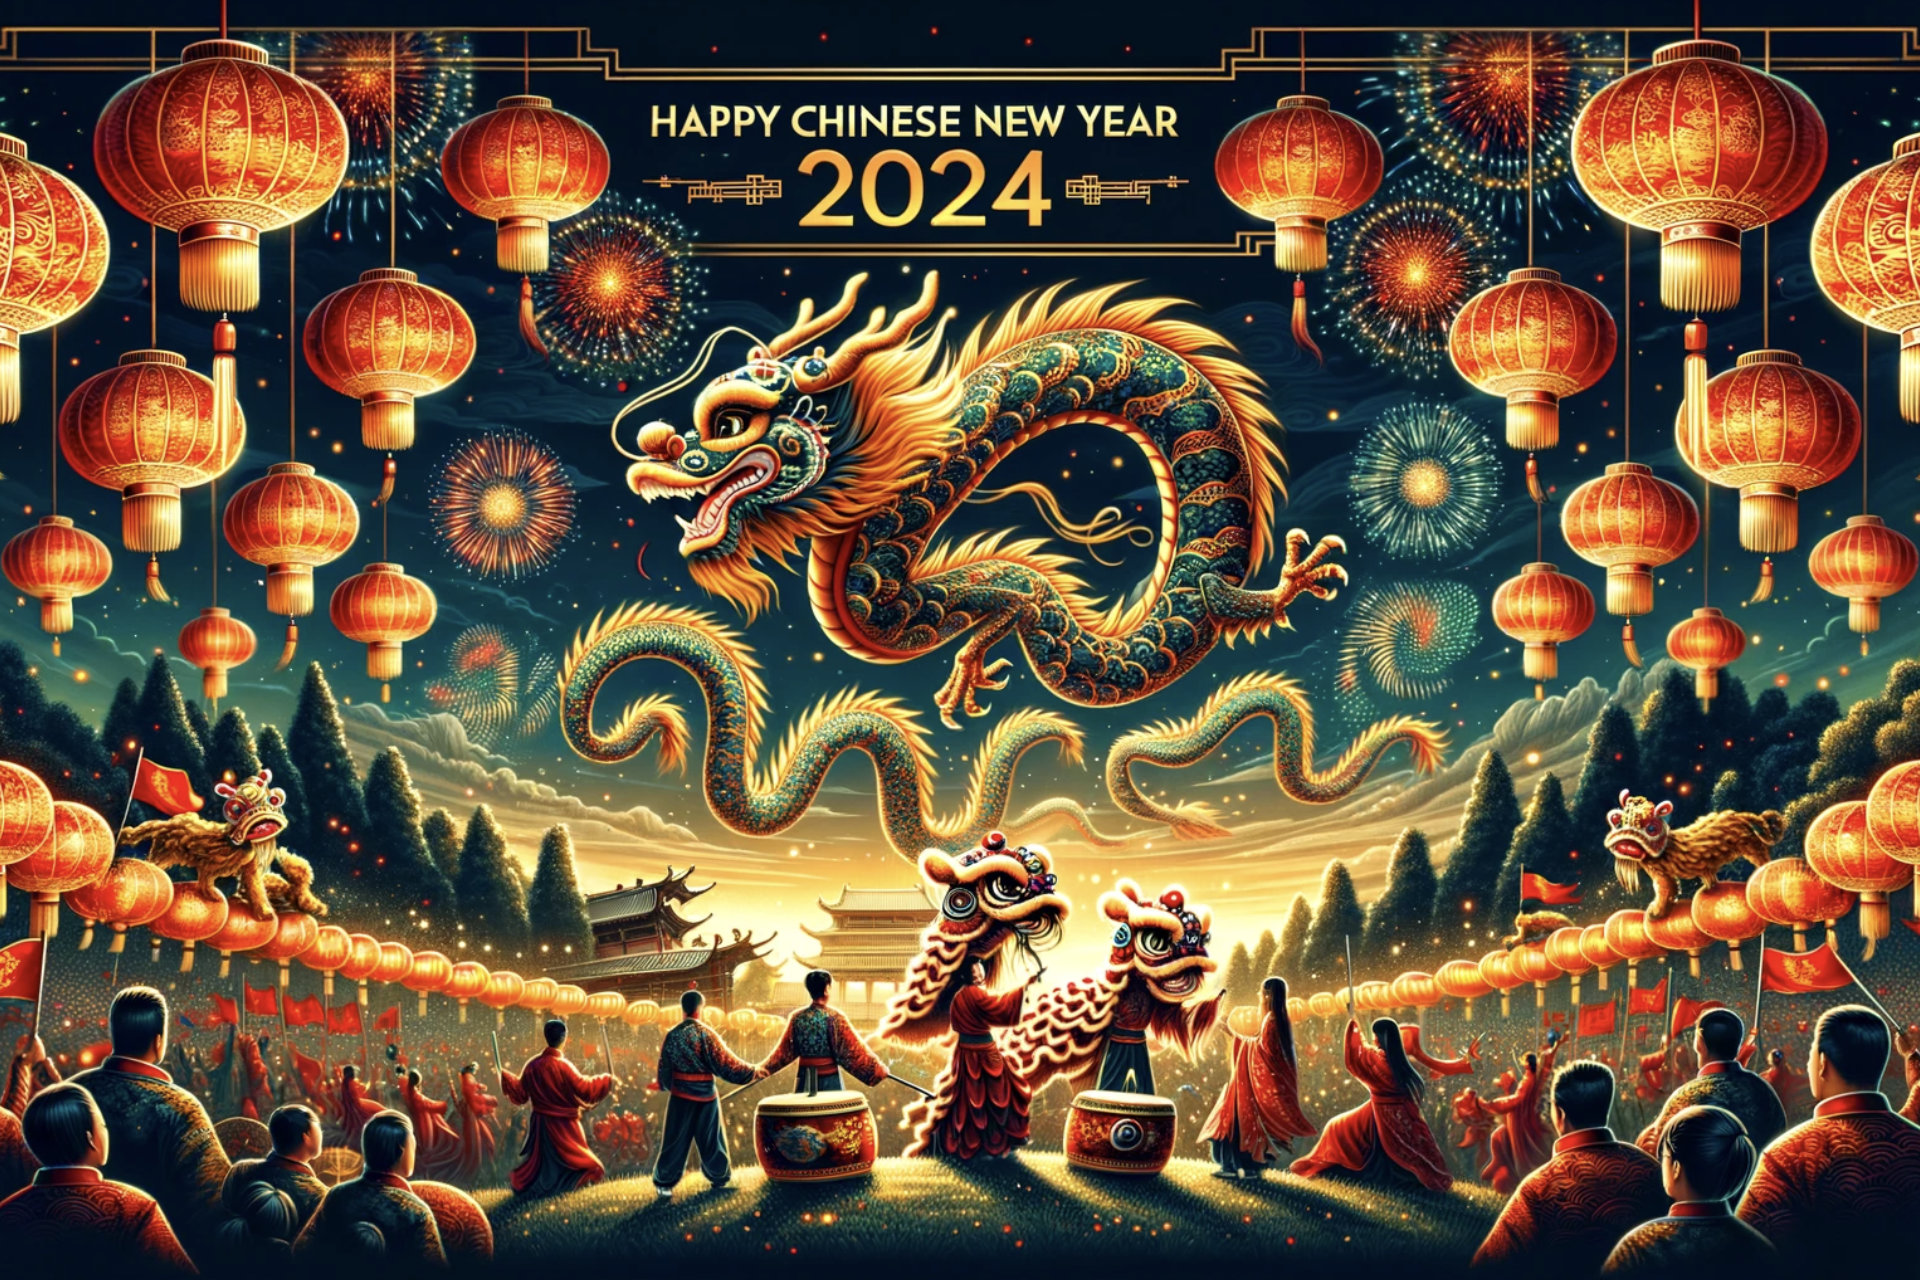 Happy Chinese New Year 2024: Best CNY